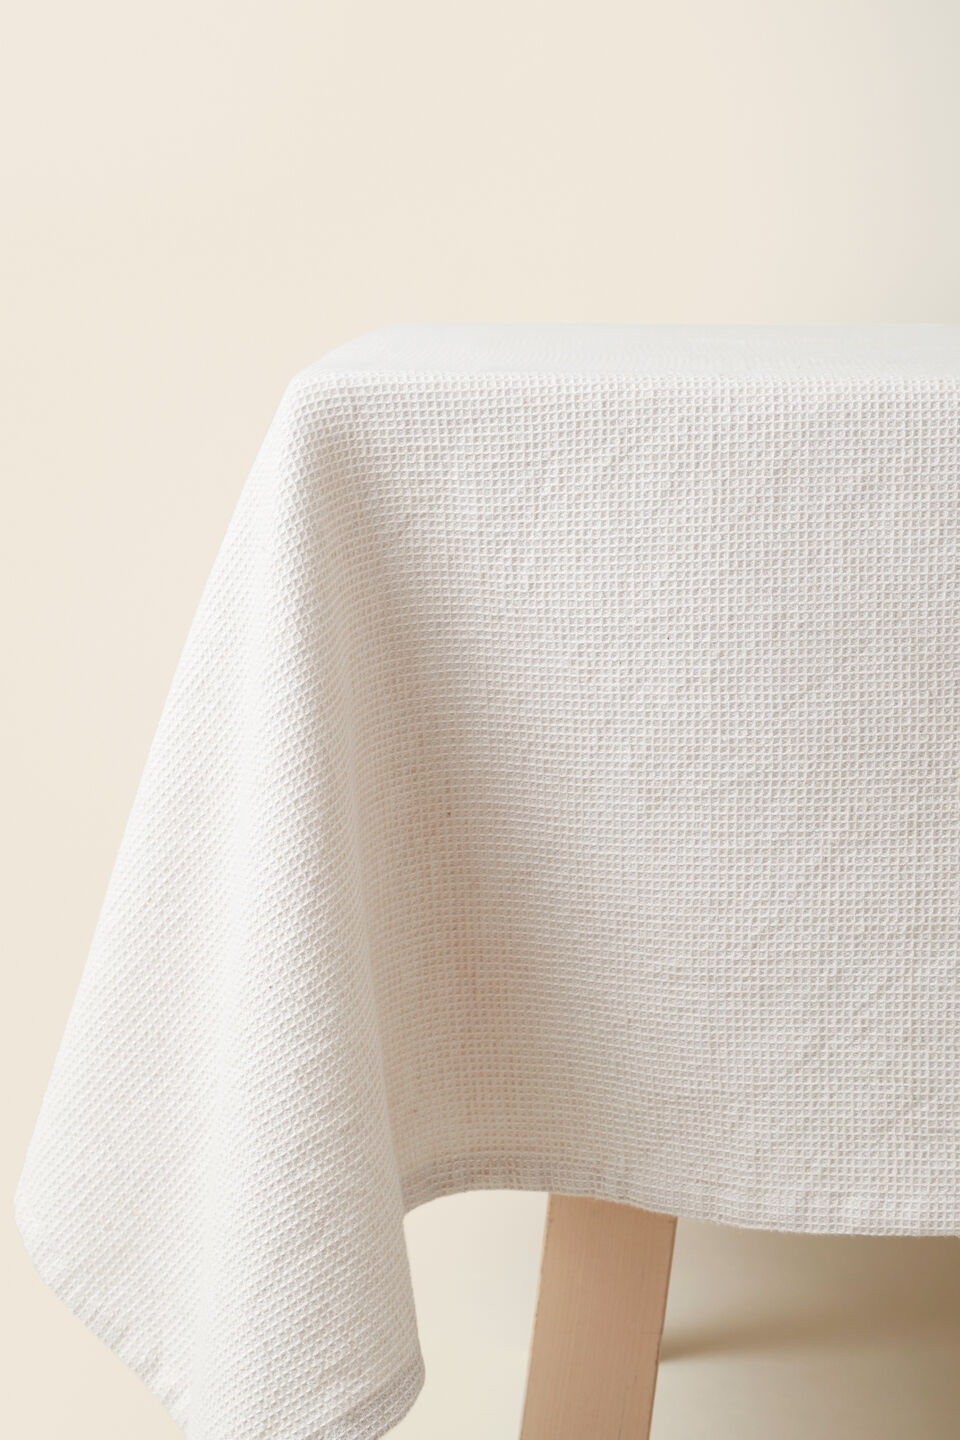 Micro Waffle Tablecloth  Desert Taupe